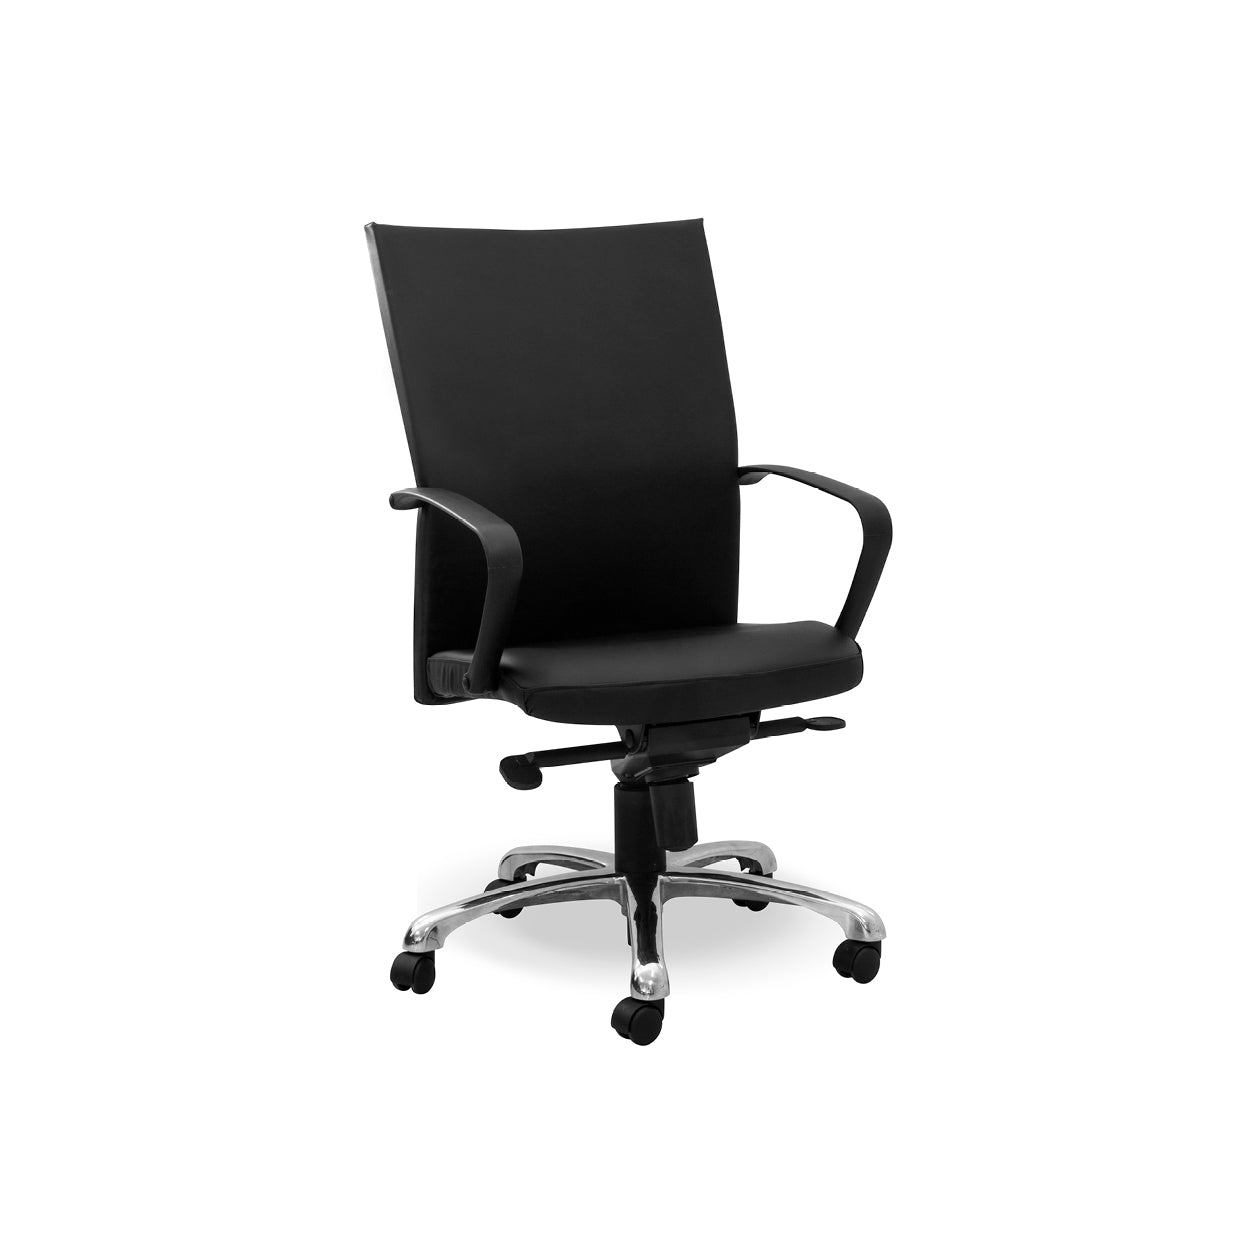 Hedcor Angelo Mid back office chair